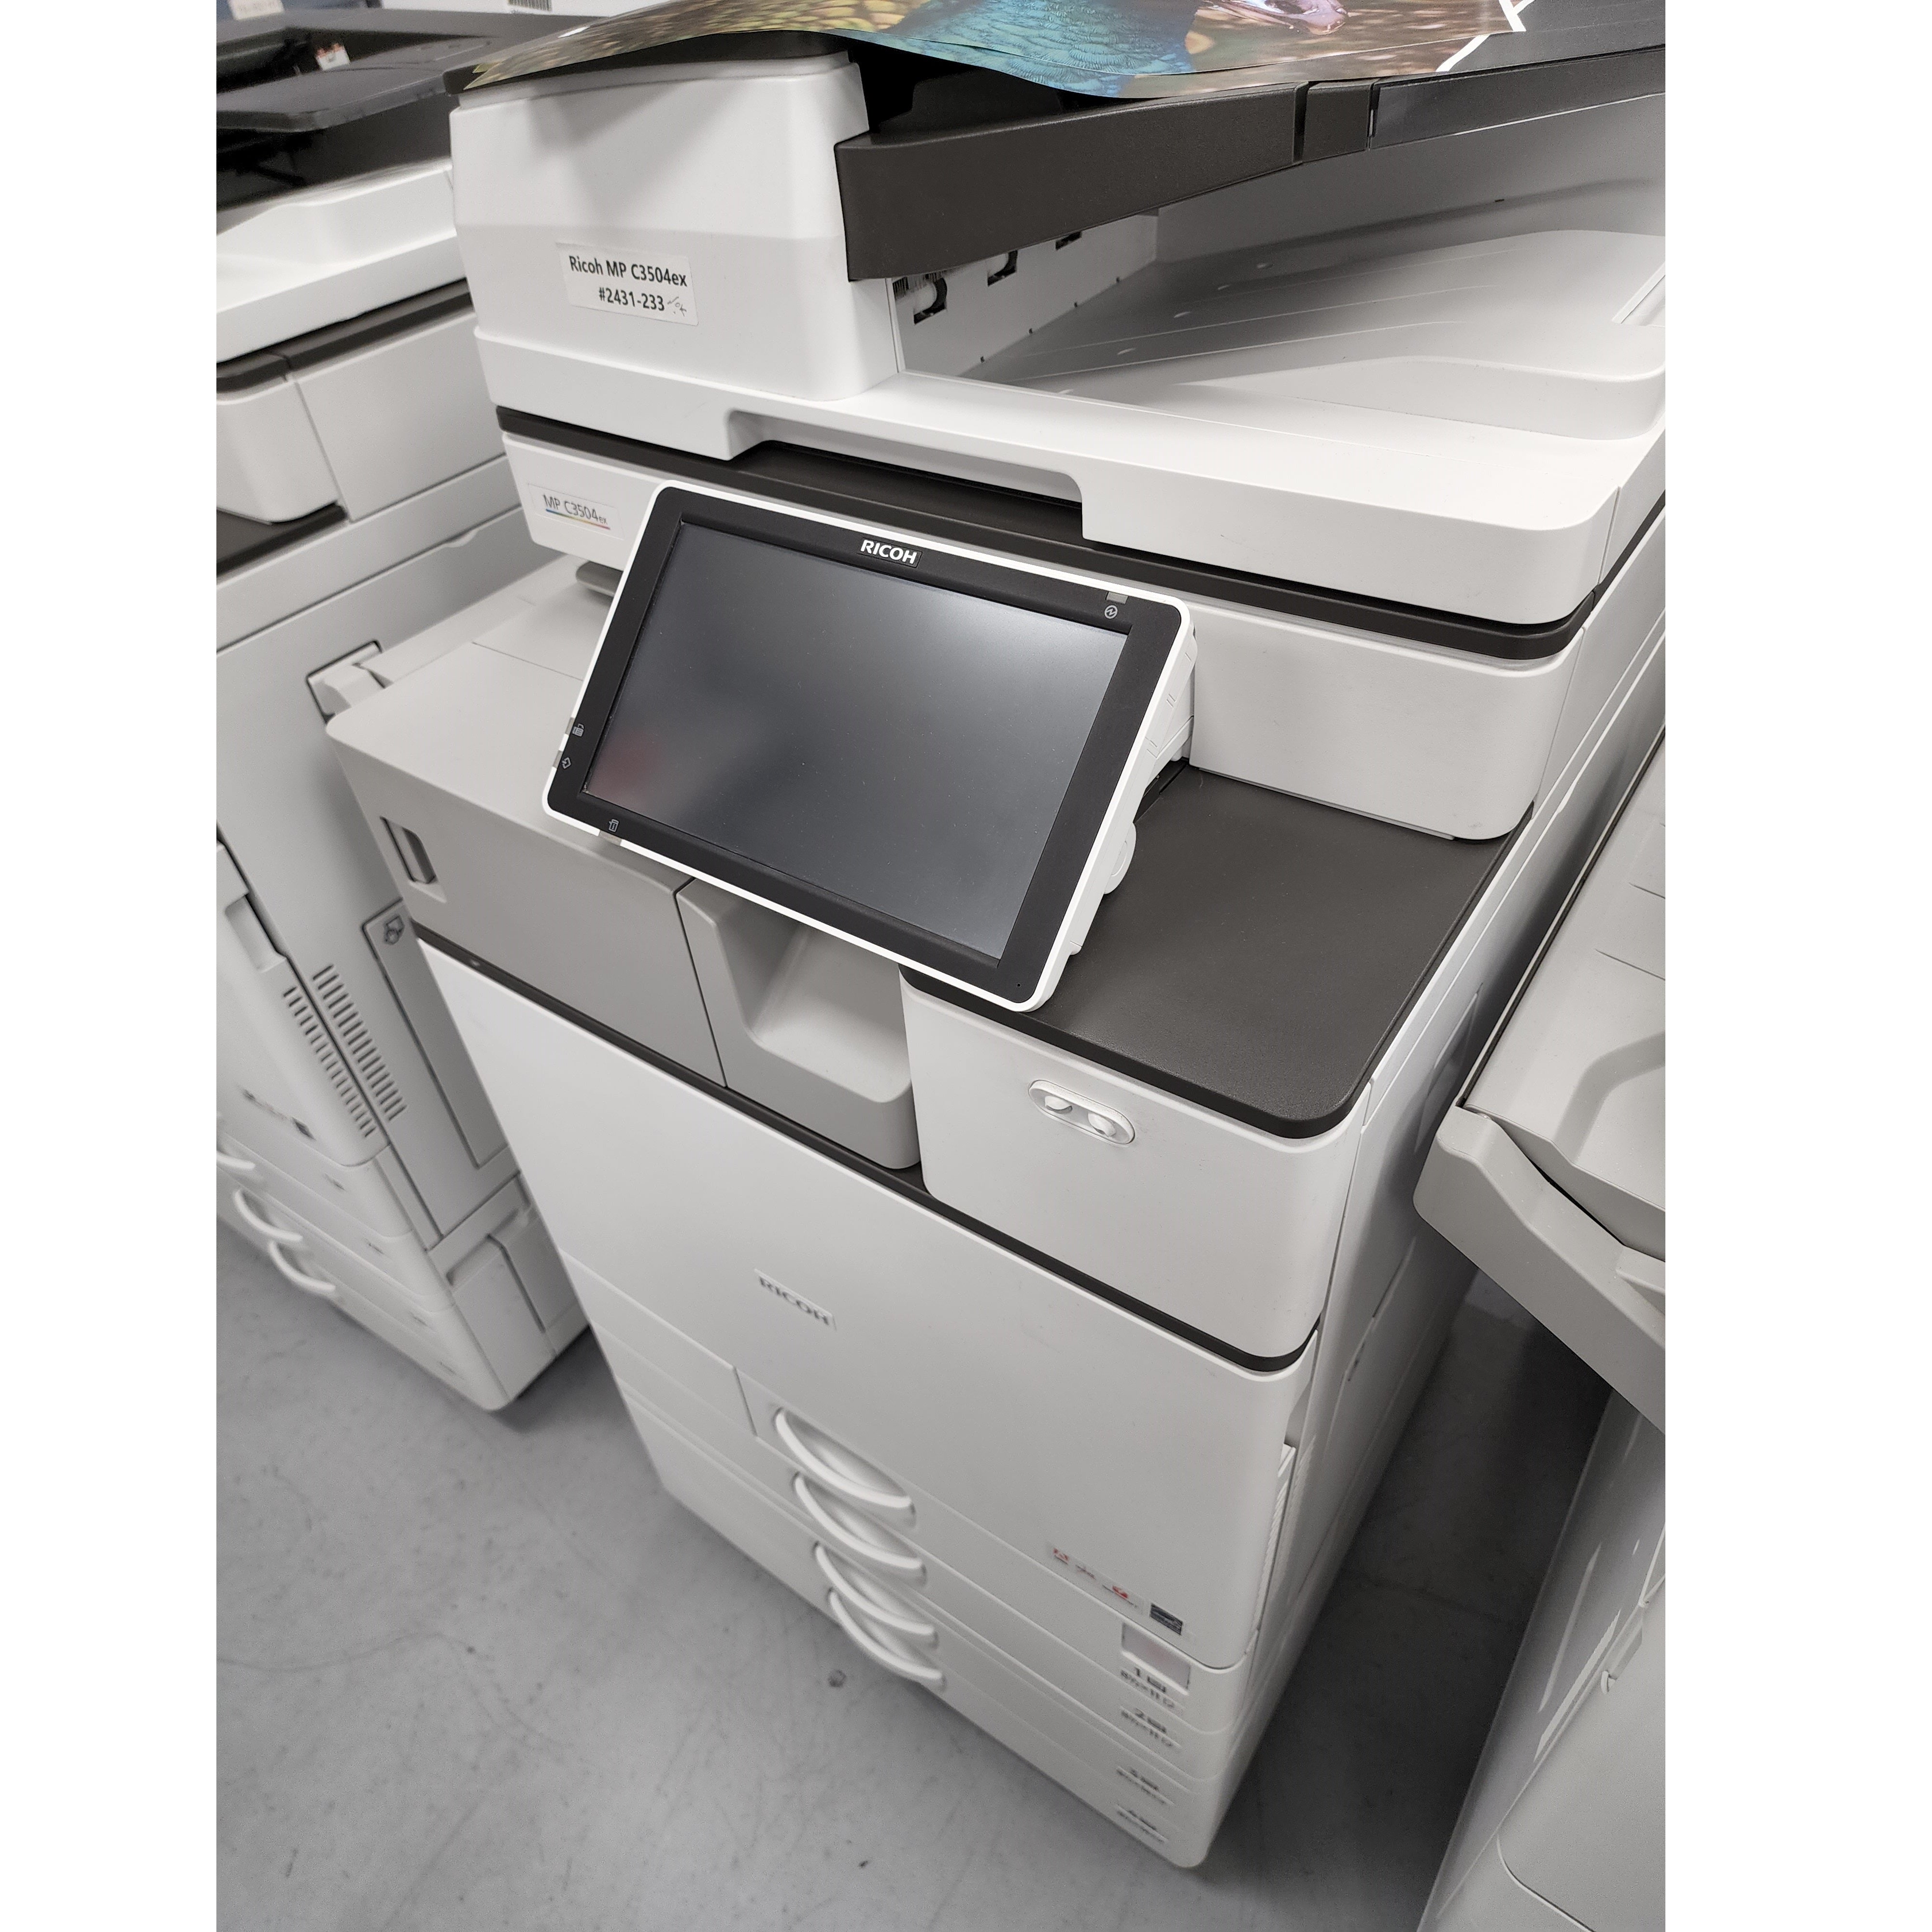 Absolute Toner $64/Month Ricoh MP C3504EX Office Color Laser Multifunction Printer Machine | Copy, Scan, Optional Fax With 1200 x 1200 DPI Print Resolution Showroom Color Copiers